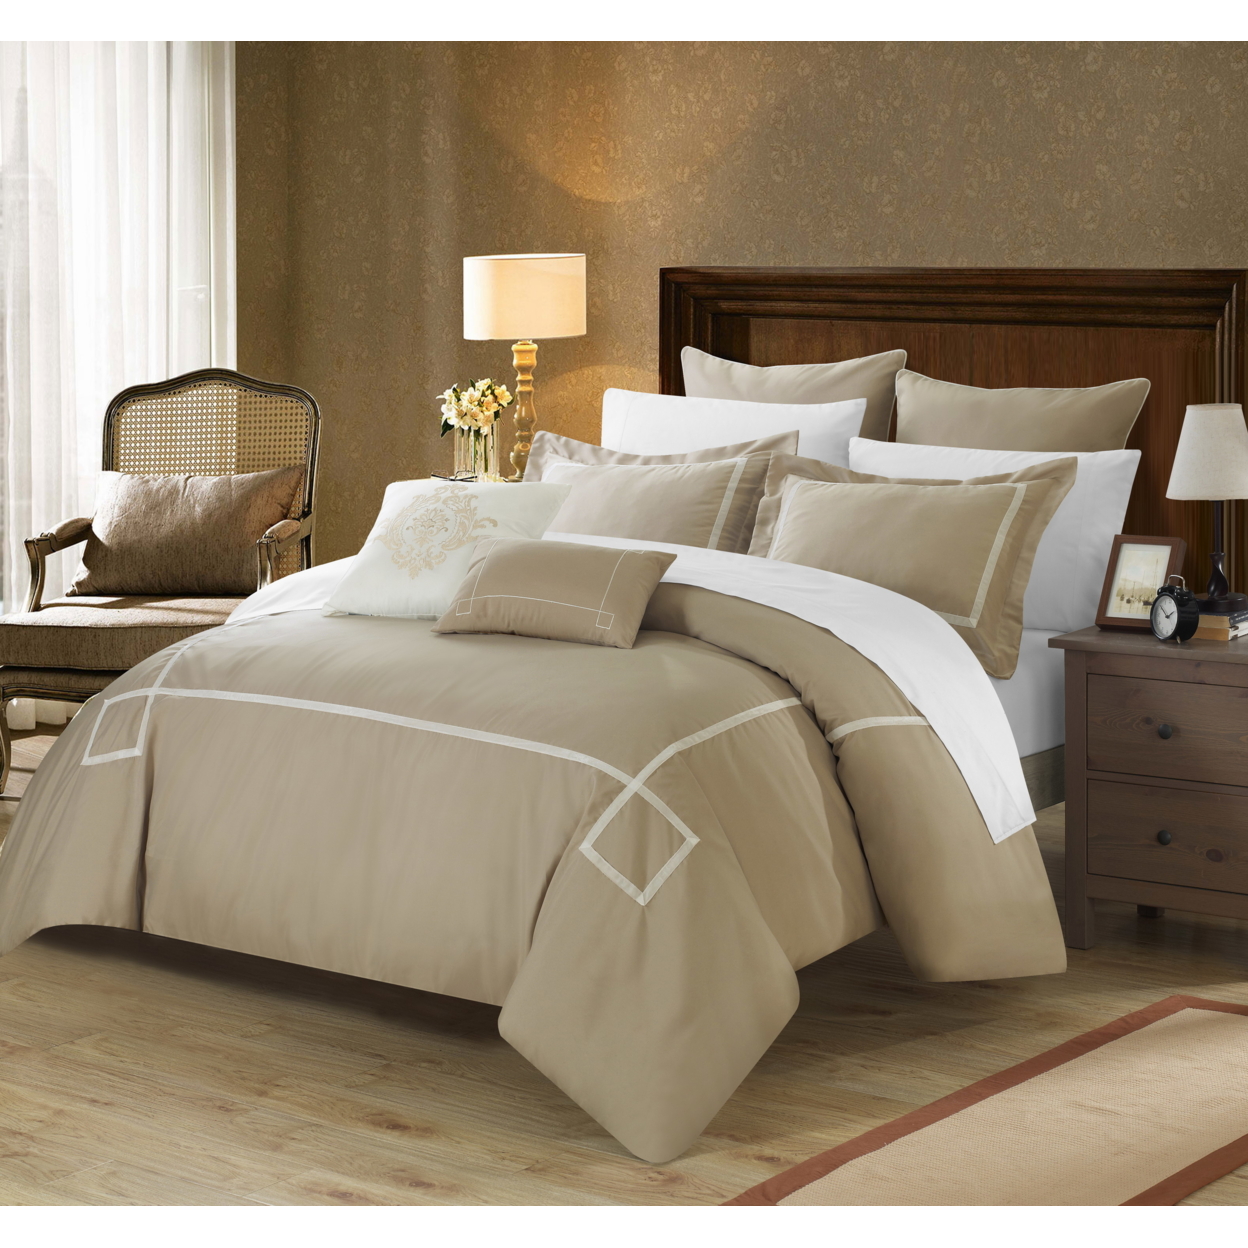 Chic Home Wilma - 7 Piece Embroidered Comforter Set - Taupe, Queen